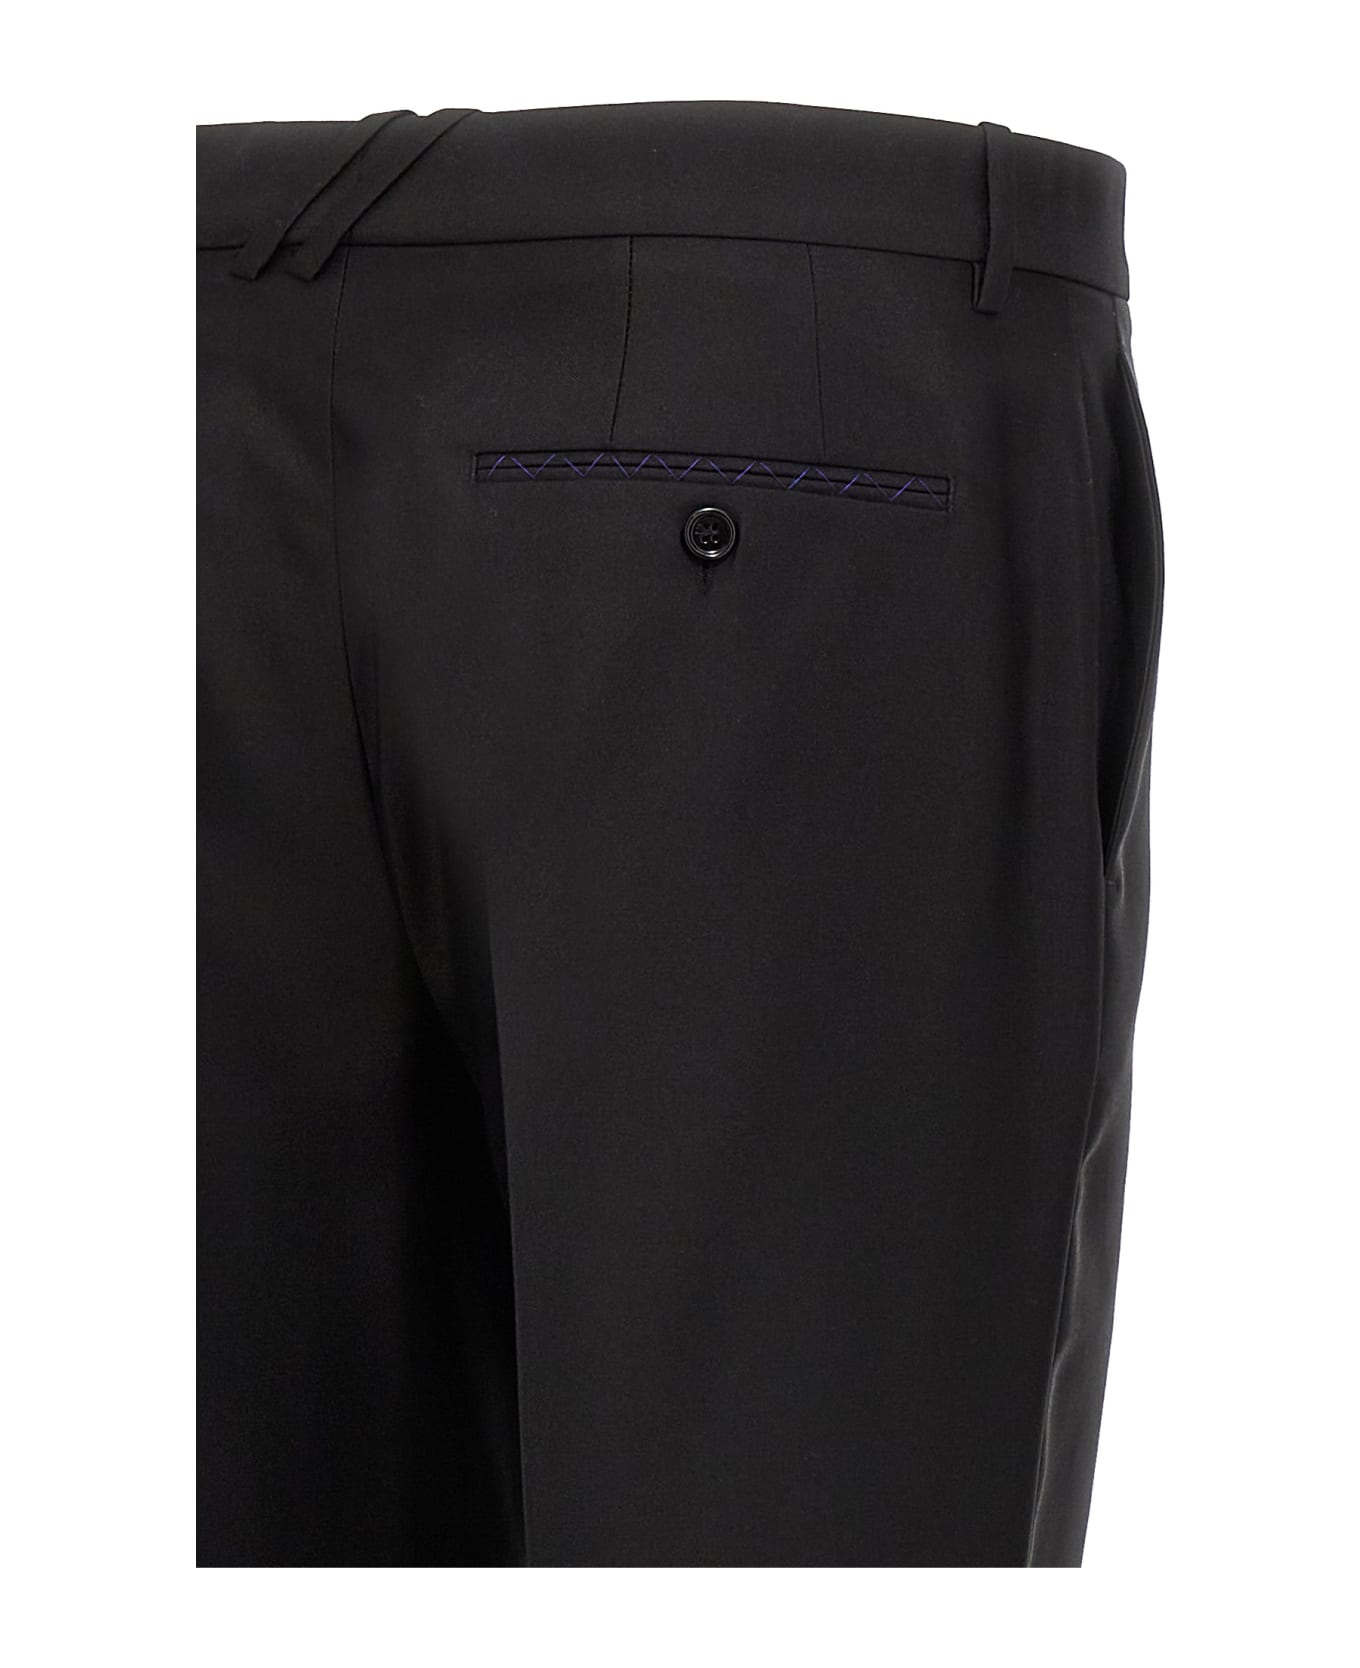 Burberry Tailored Trousers - Black ボトムス